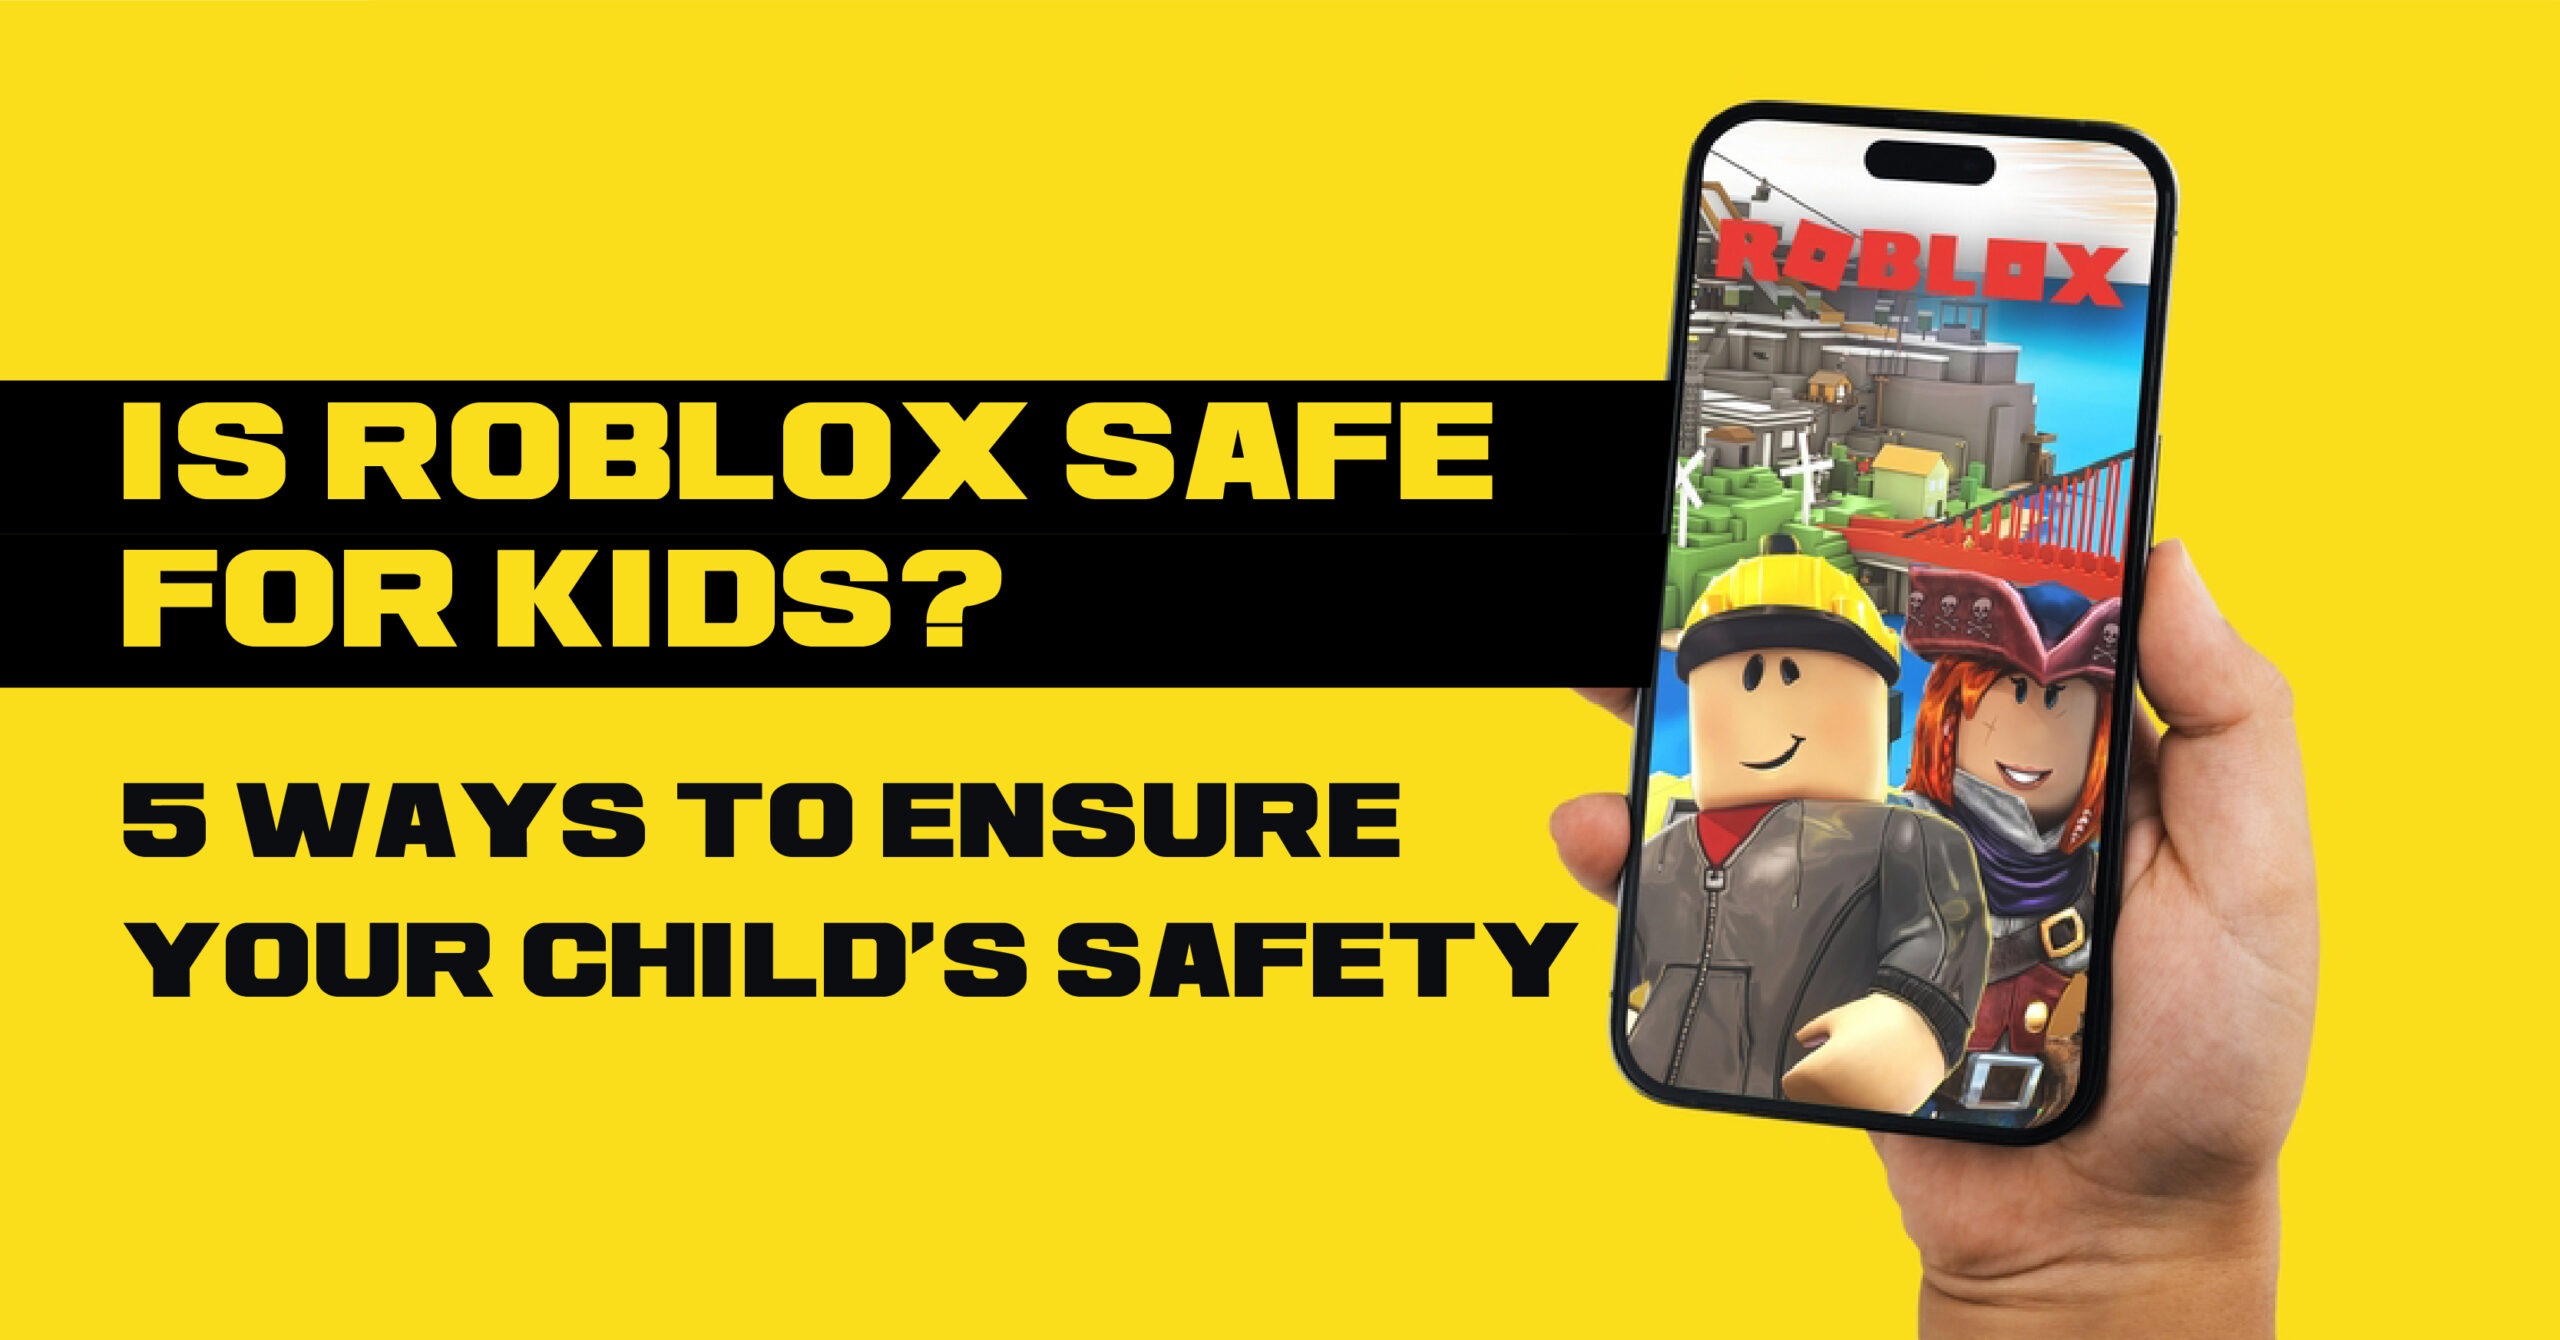 Is Roblox Safe for Kids?: 5 Ways to Ensure Your Child's Safety